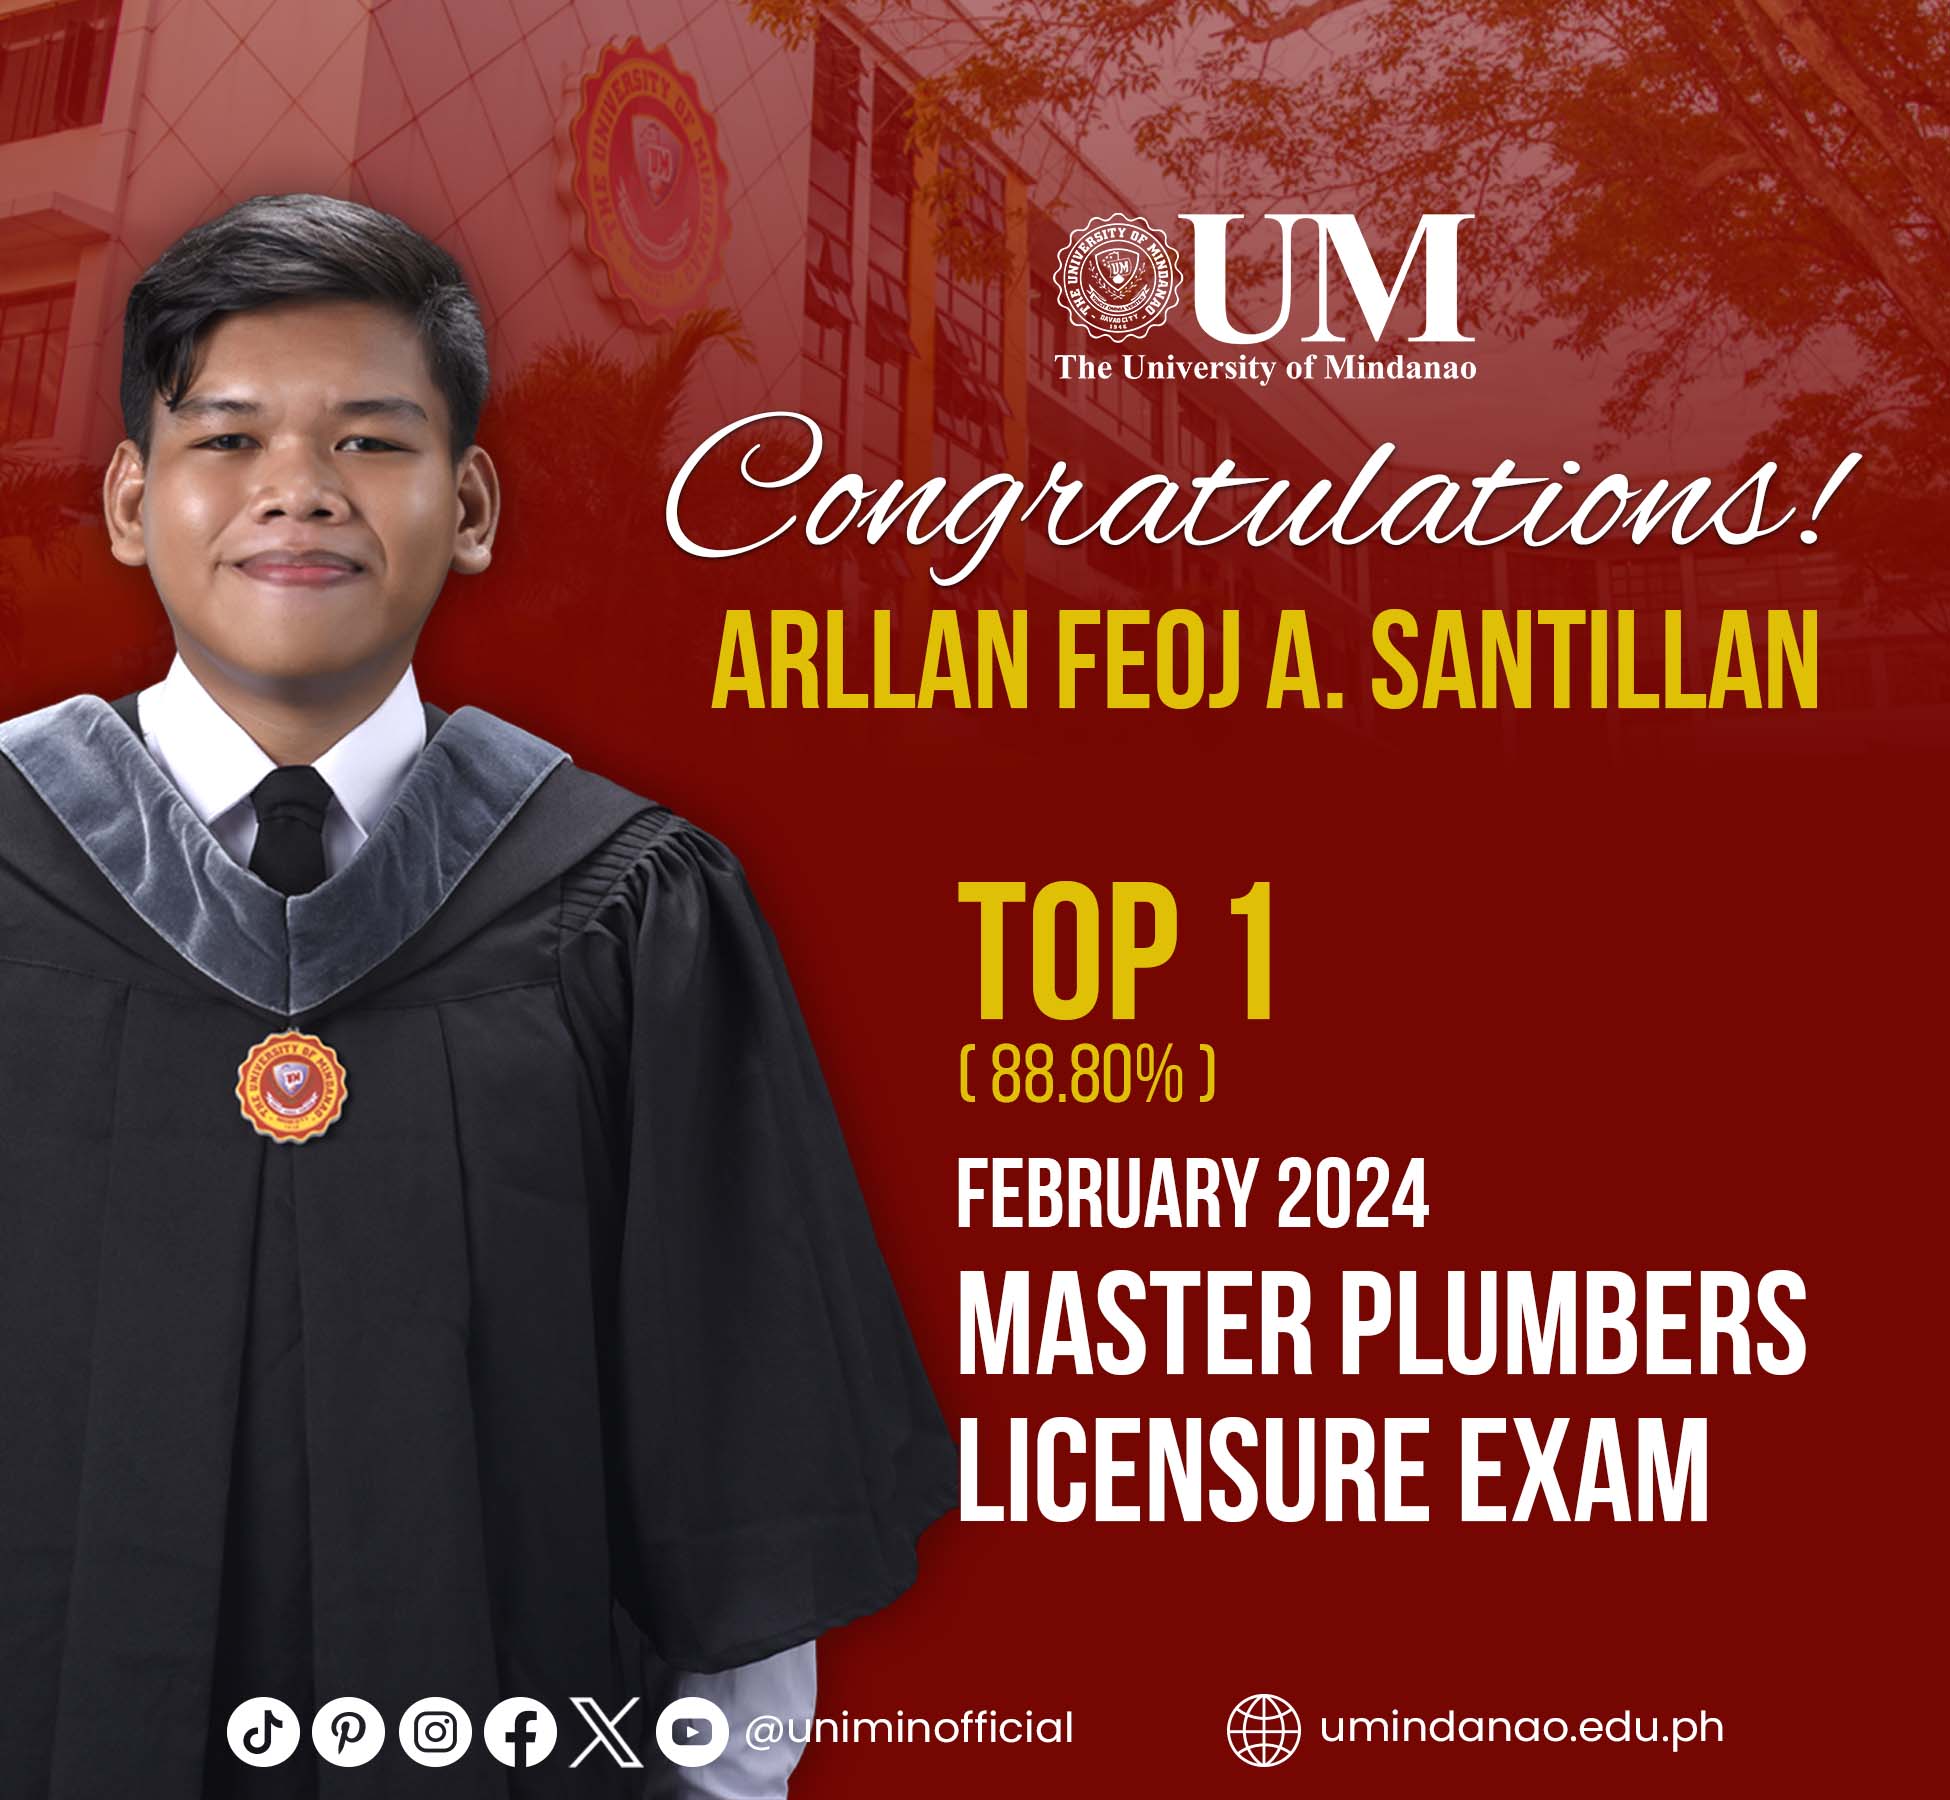 UMian places first in Feb 2024 Master Plumber licensure exam